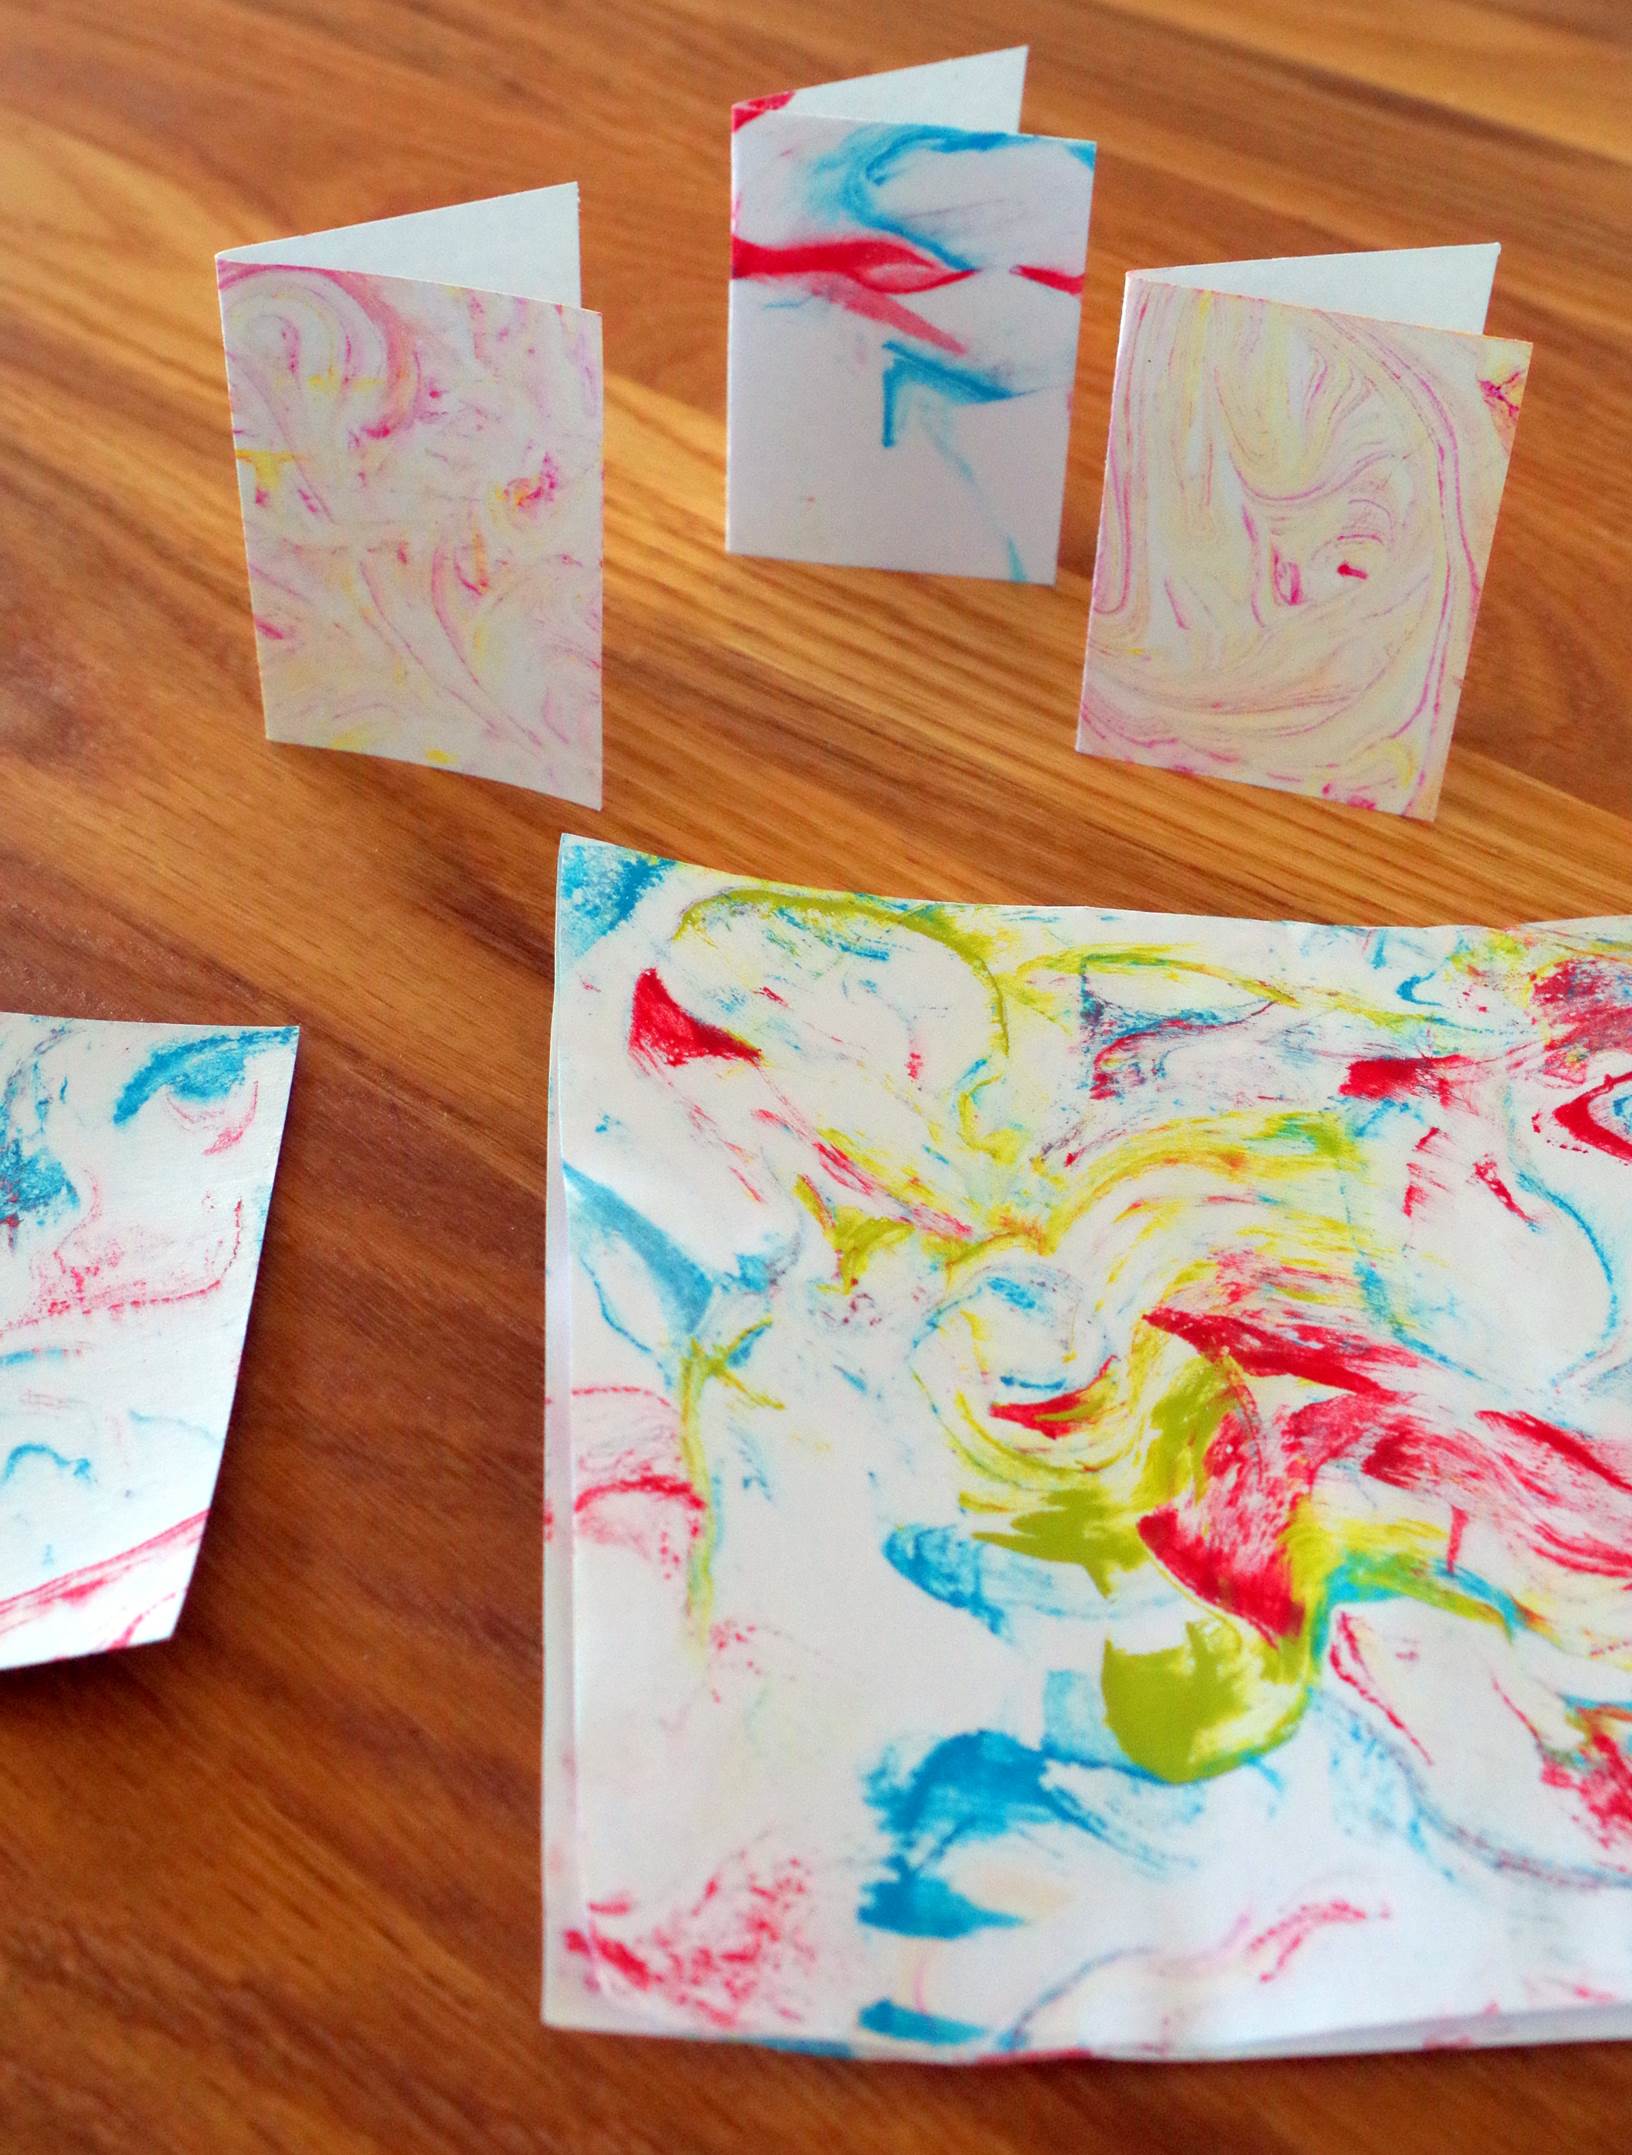 Shaving Foam Marbling is vibrant and fun. You could use the finished art to make gift tags.